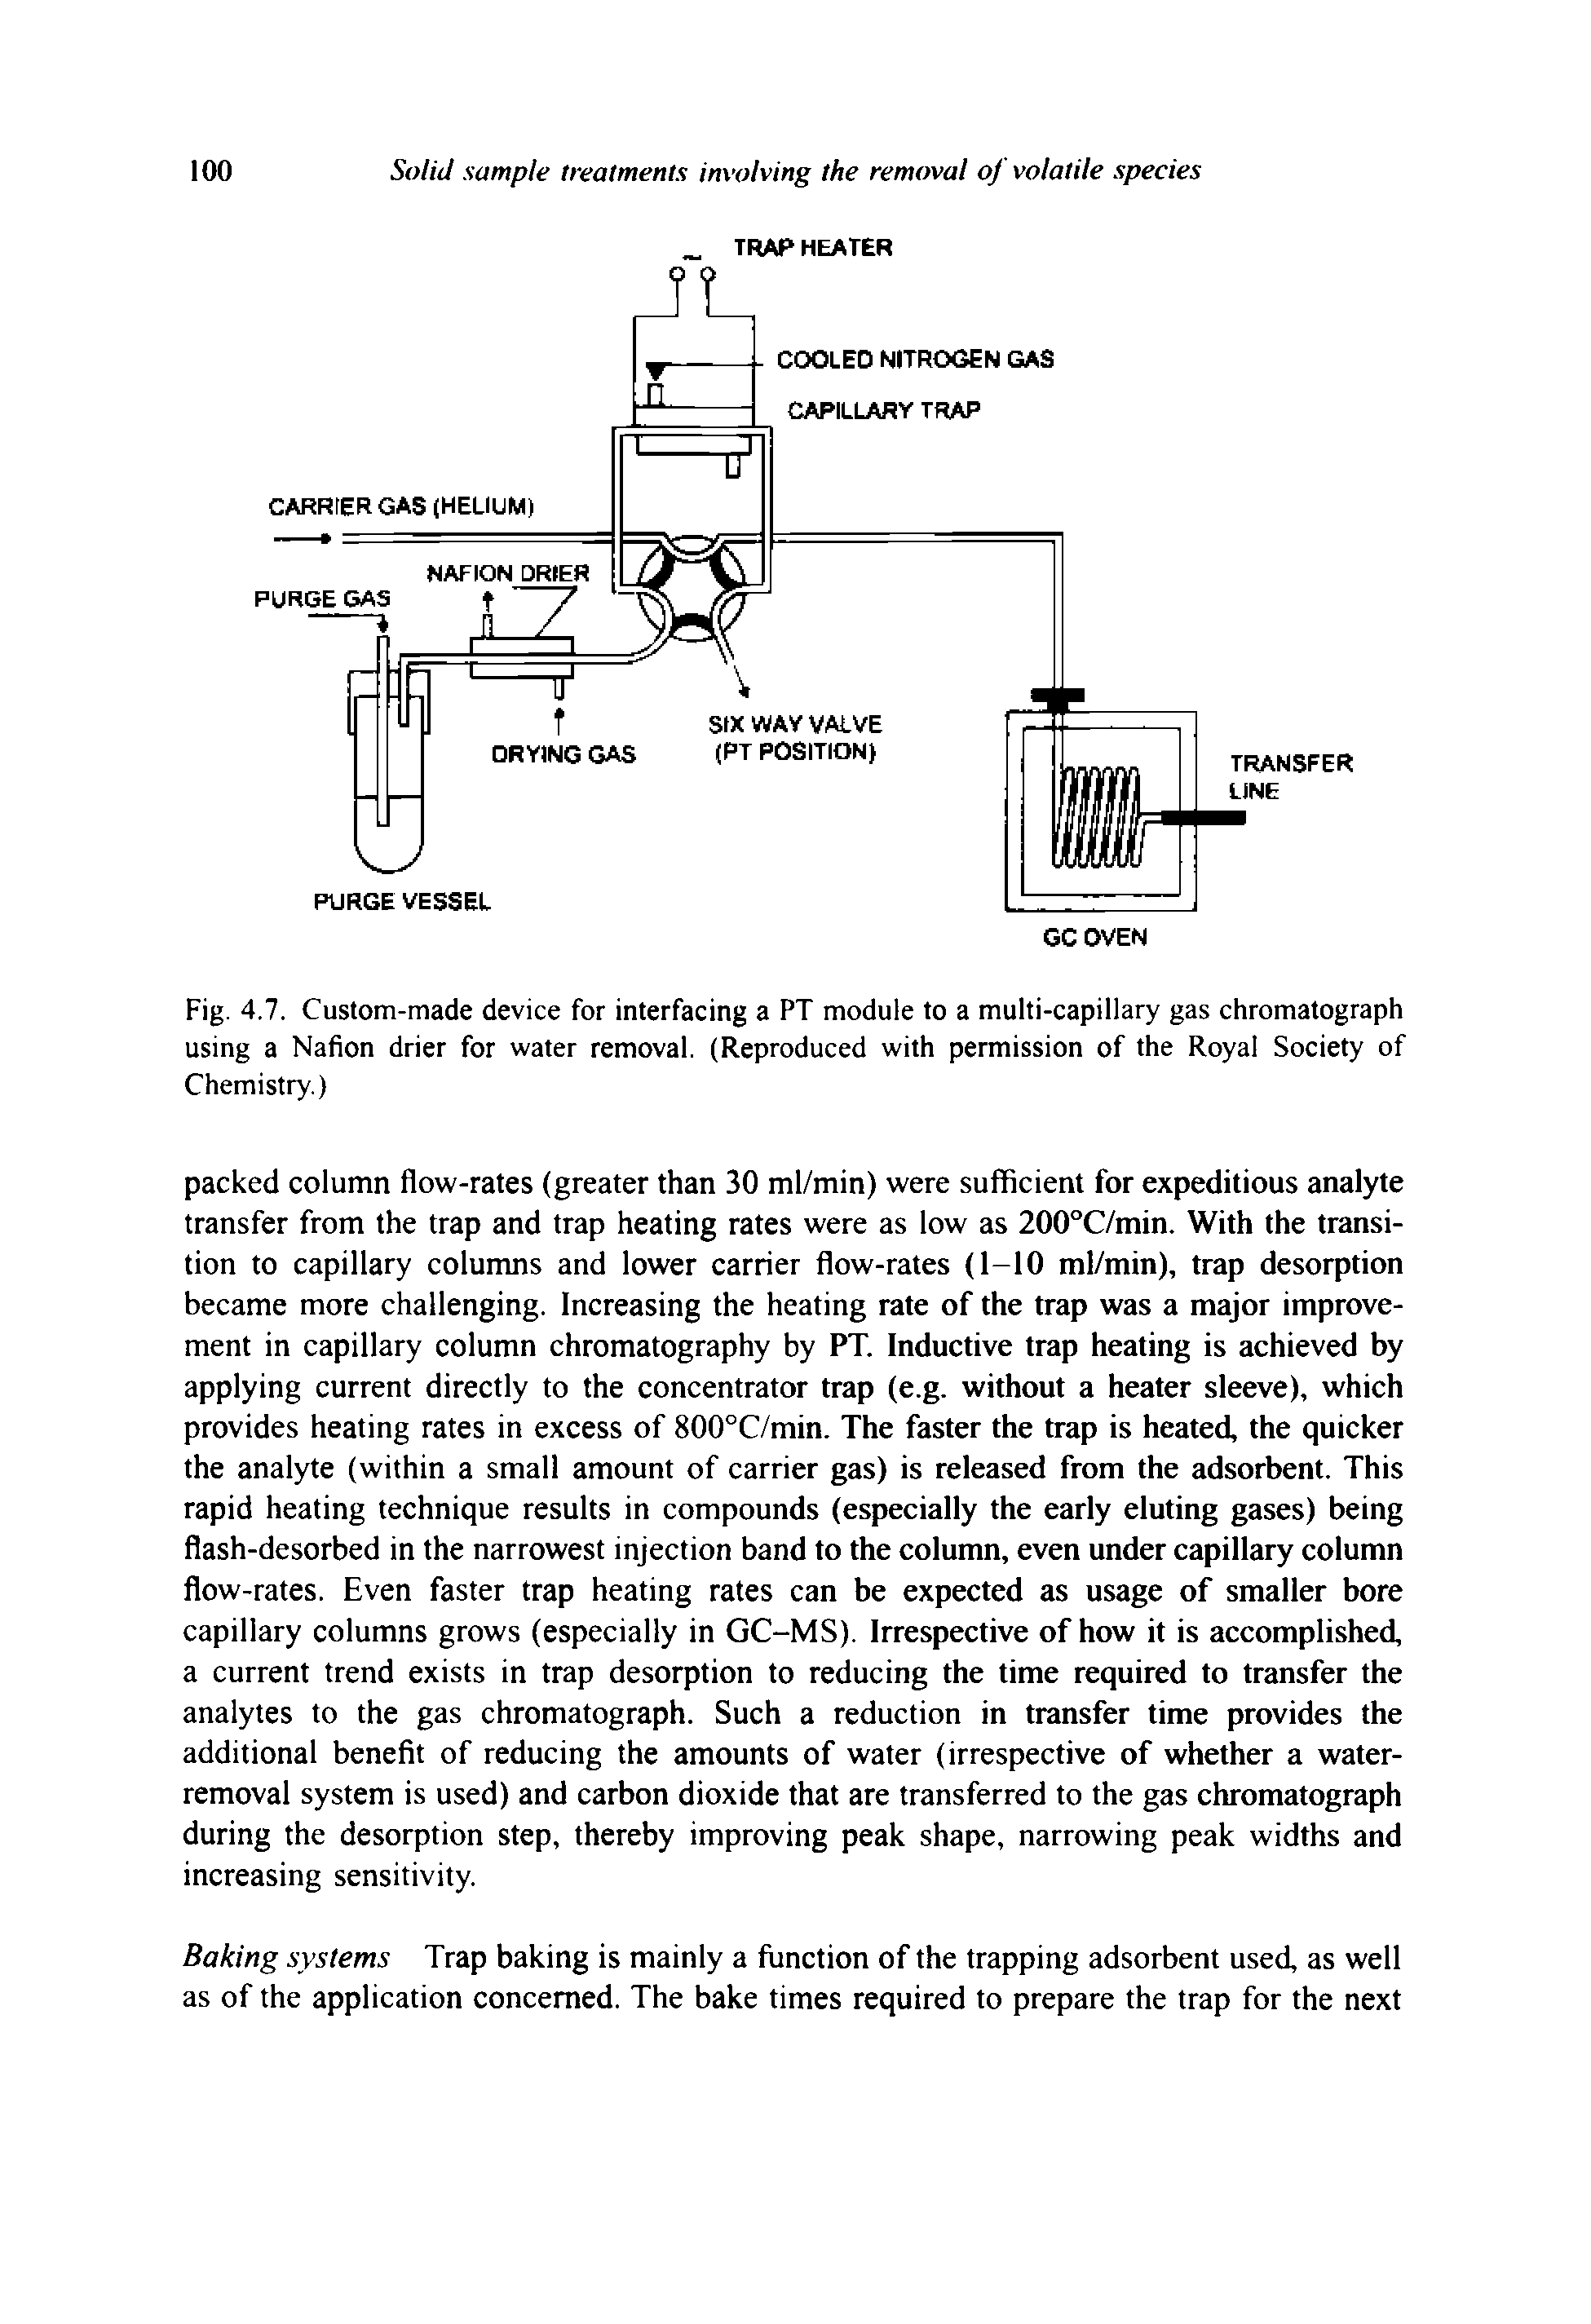 Fig. 4.7. Custom-made device for interfacing a PT module to a multi-capillary gas chromatograph using a Nafion drier for water removal. (Reproduced with permission of the Royal Society of Chemistry.)...